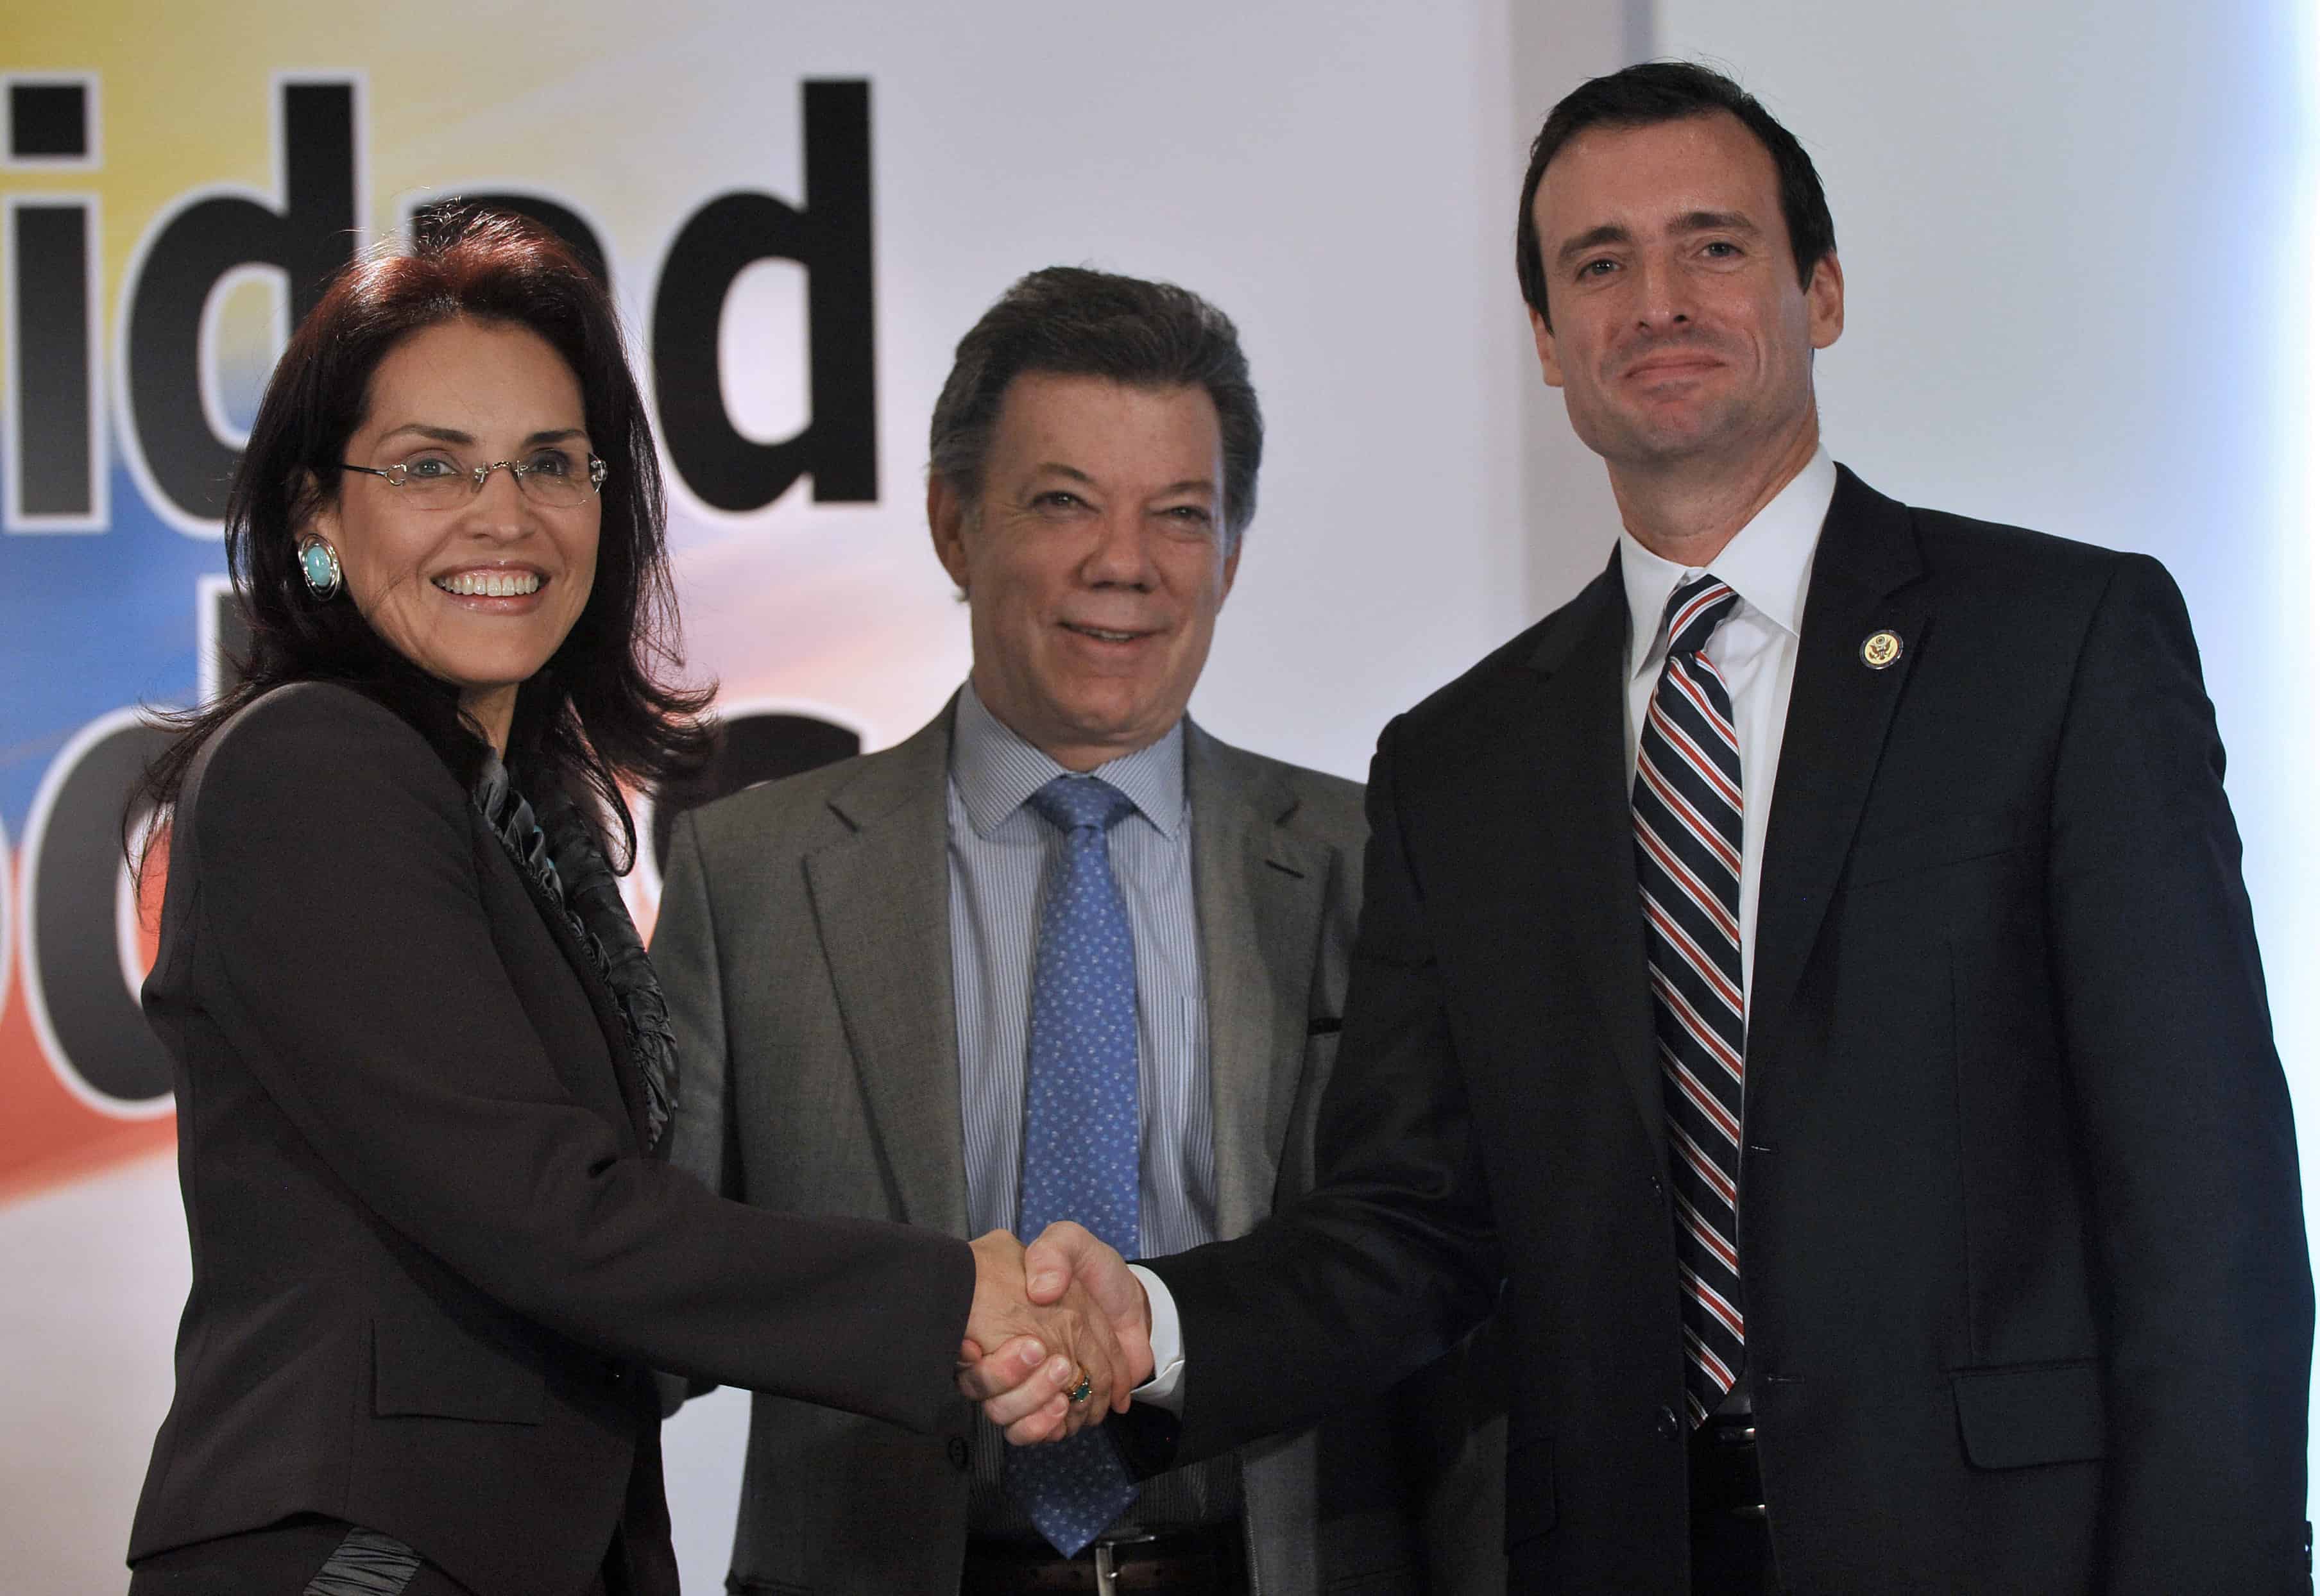 In this 2011 file photo, Colombia's President Juan Manuel Santos, center, shakes hands with Colombia's Attorney General Viviane Morales and U.S. Attorney for the Southern District of Florida Wifredo Ferrer.